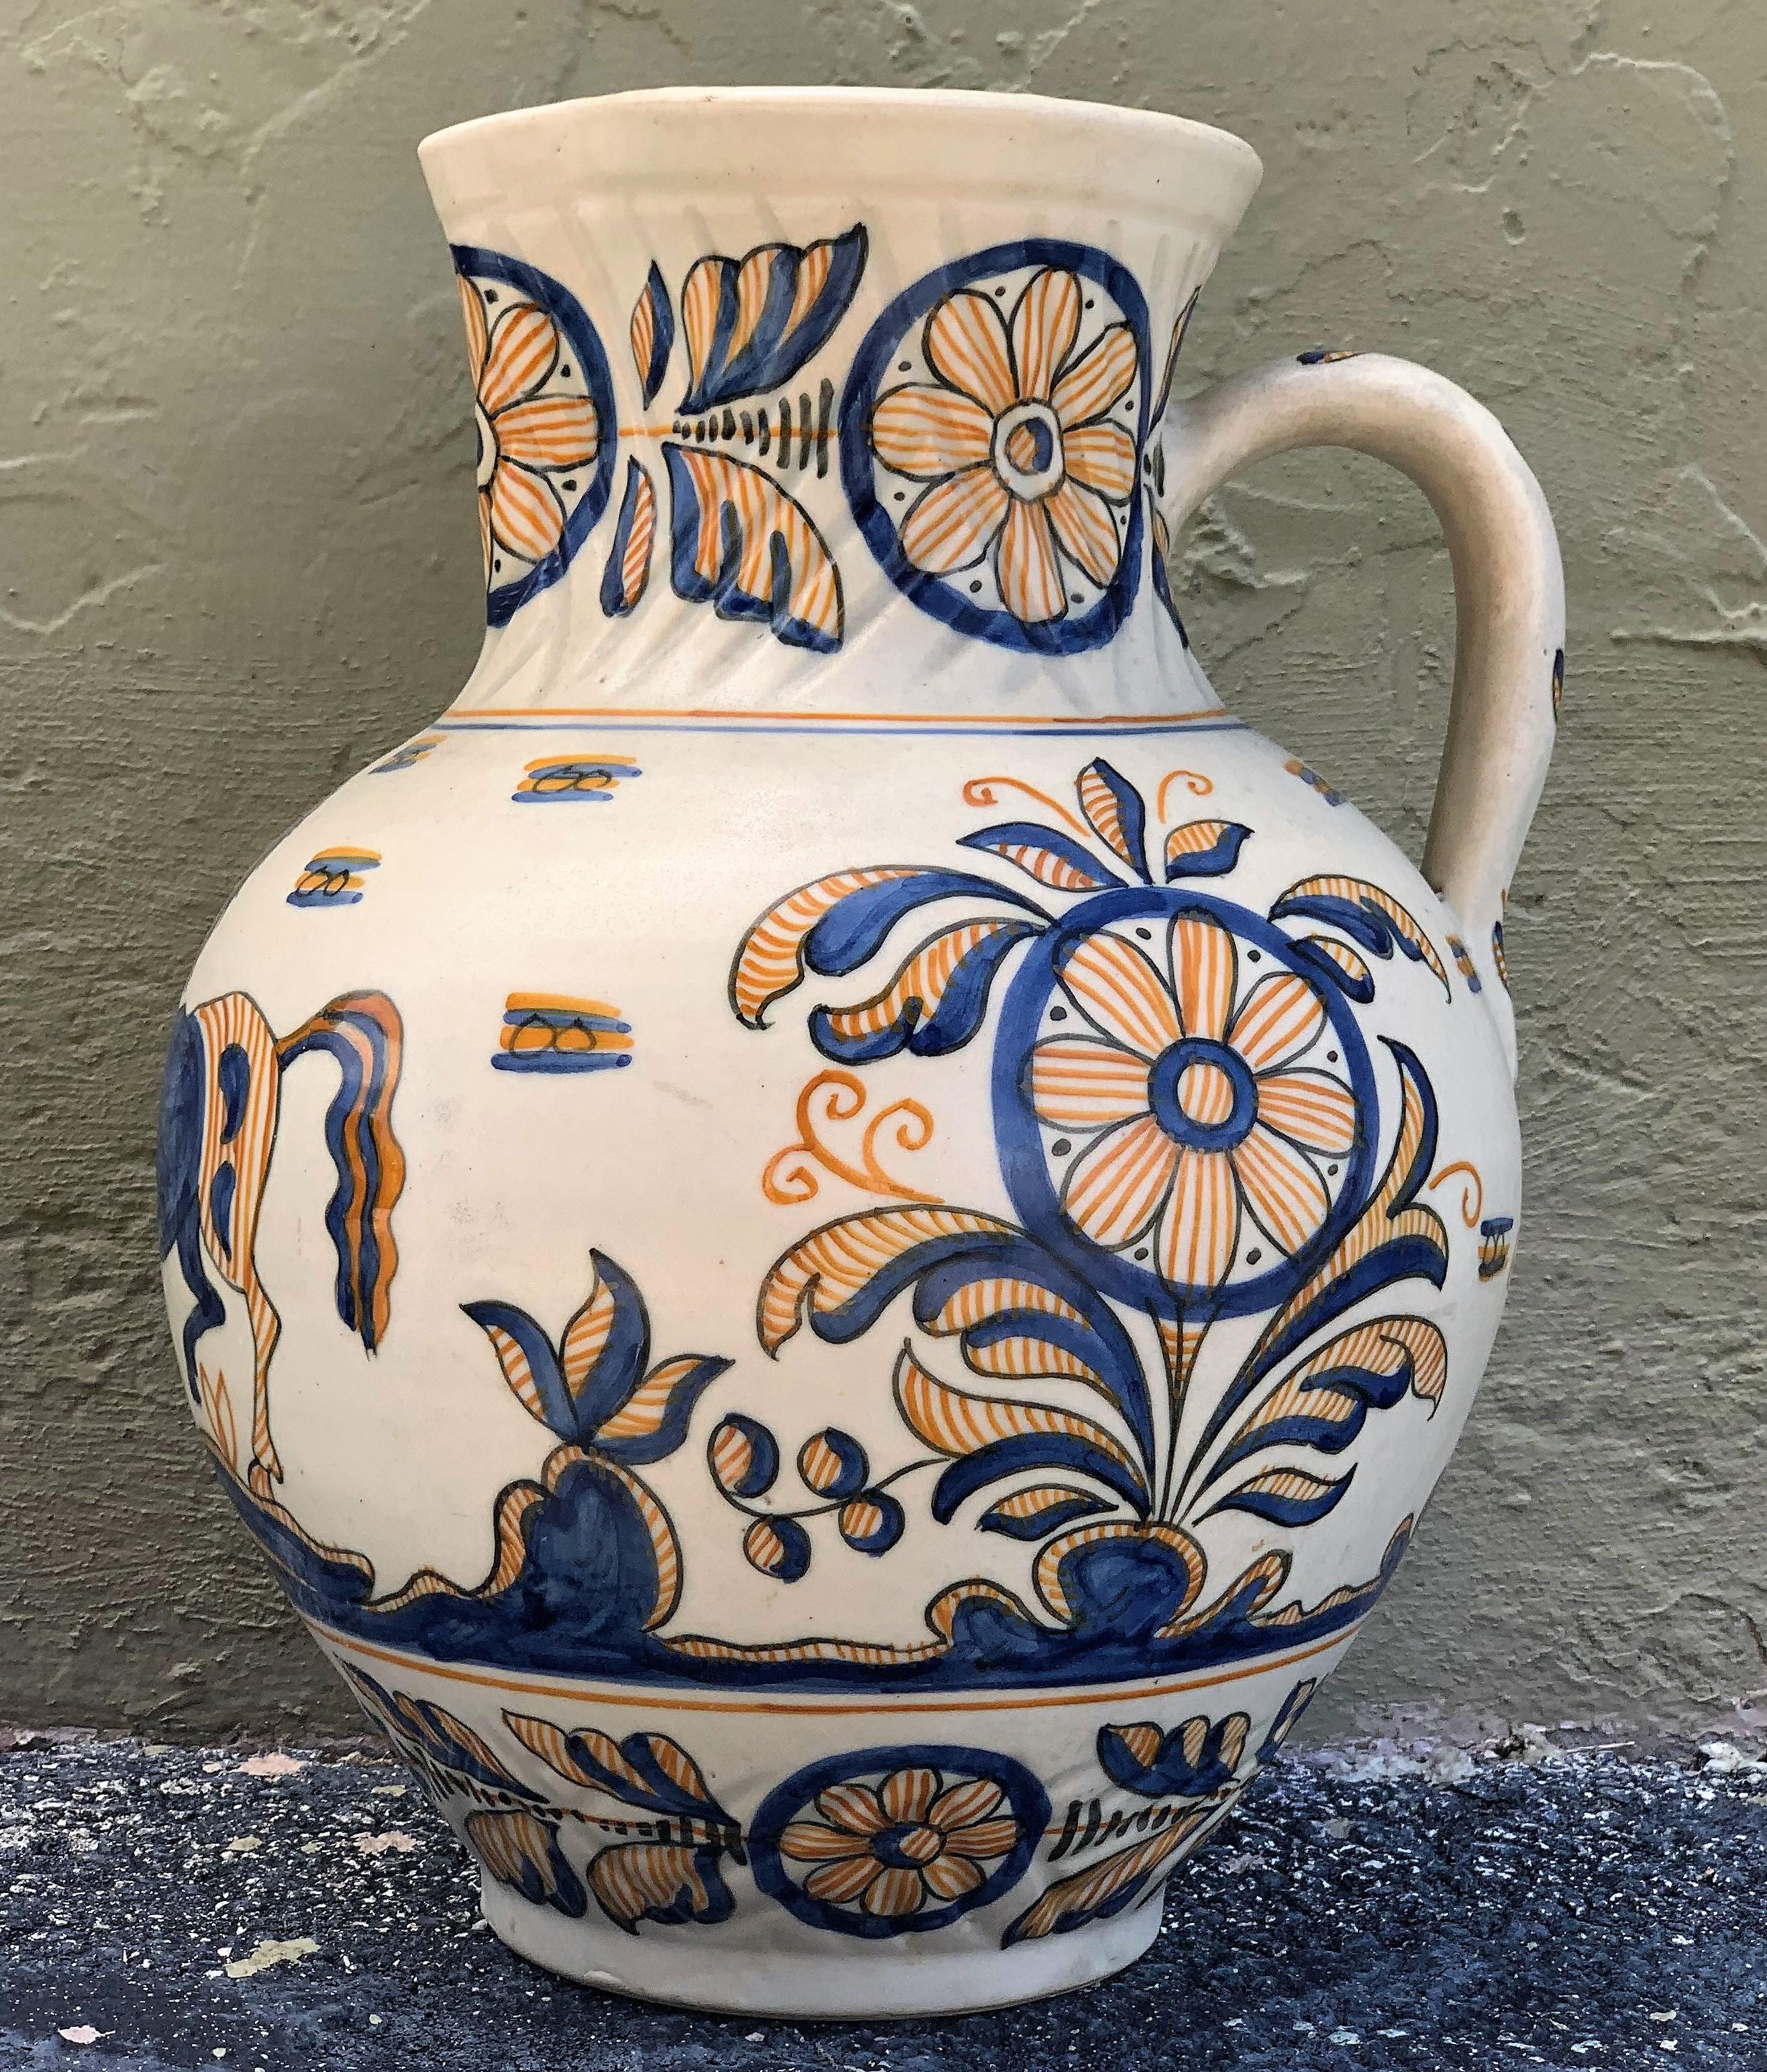 A striking Spanish glazed earthenware two-handled blue and yellow painted urn or vase with molded handle, the body underglaze blue & yellow decorated, 19th century.